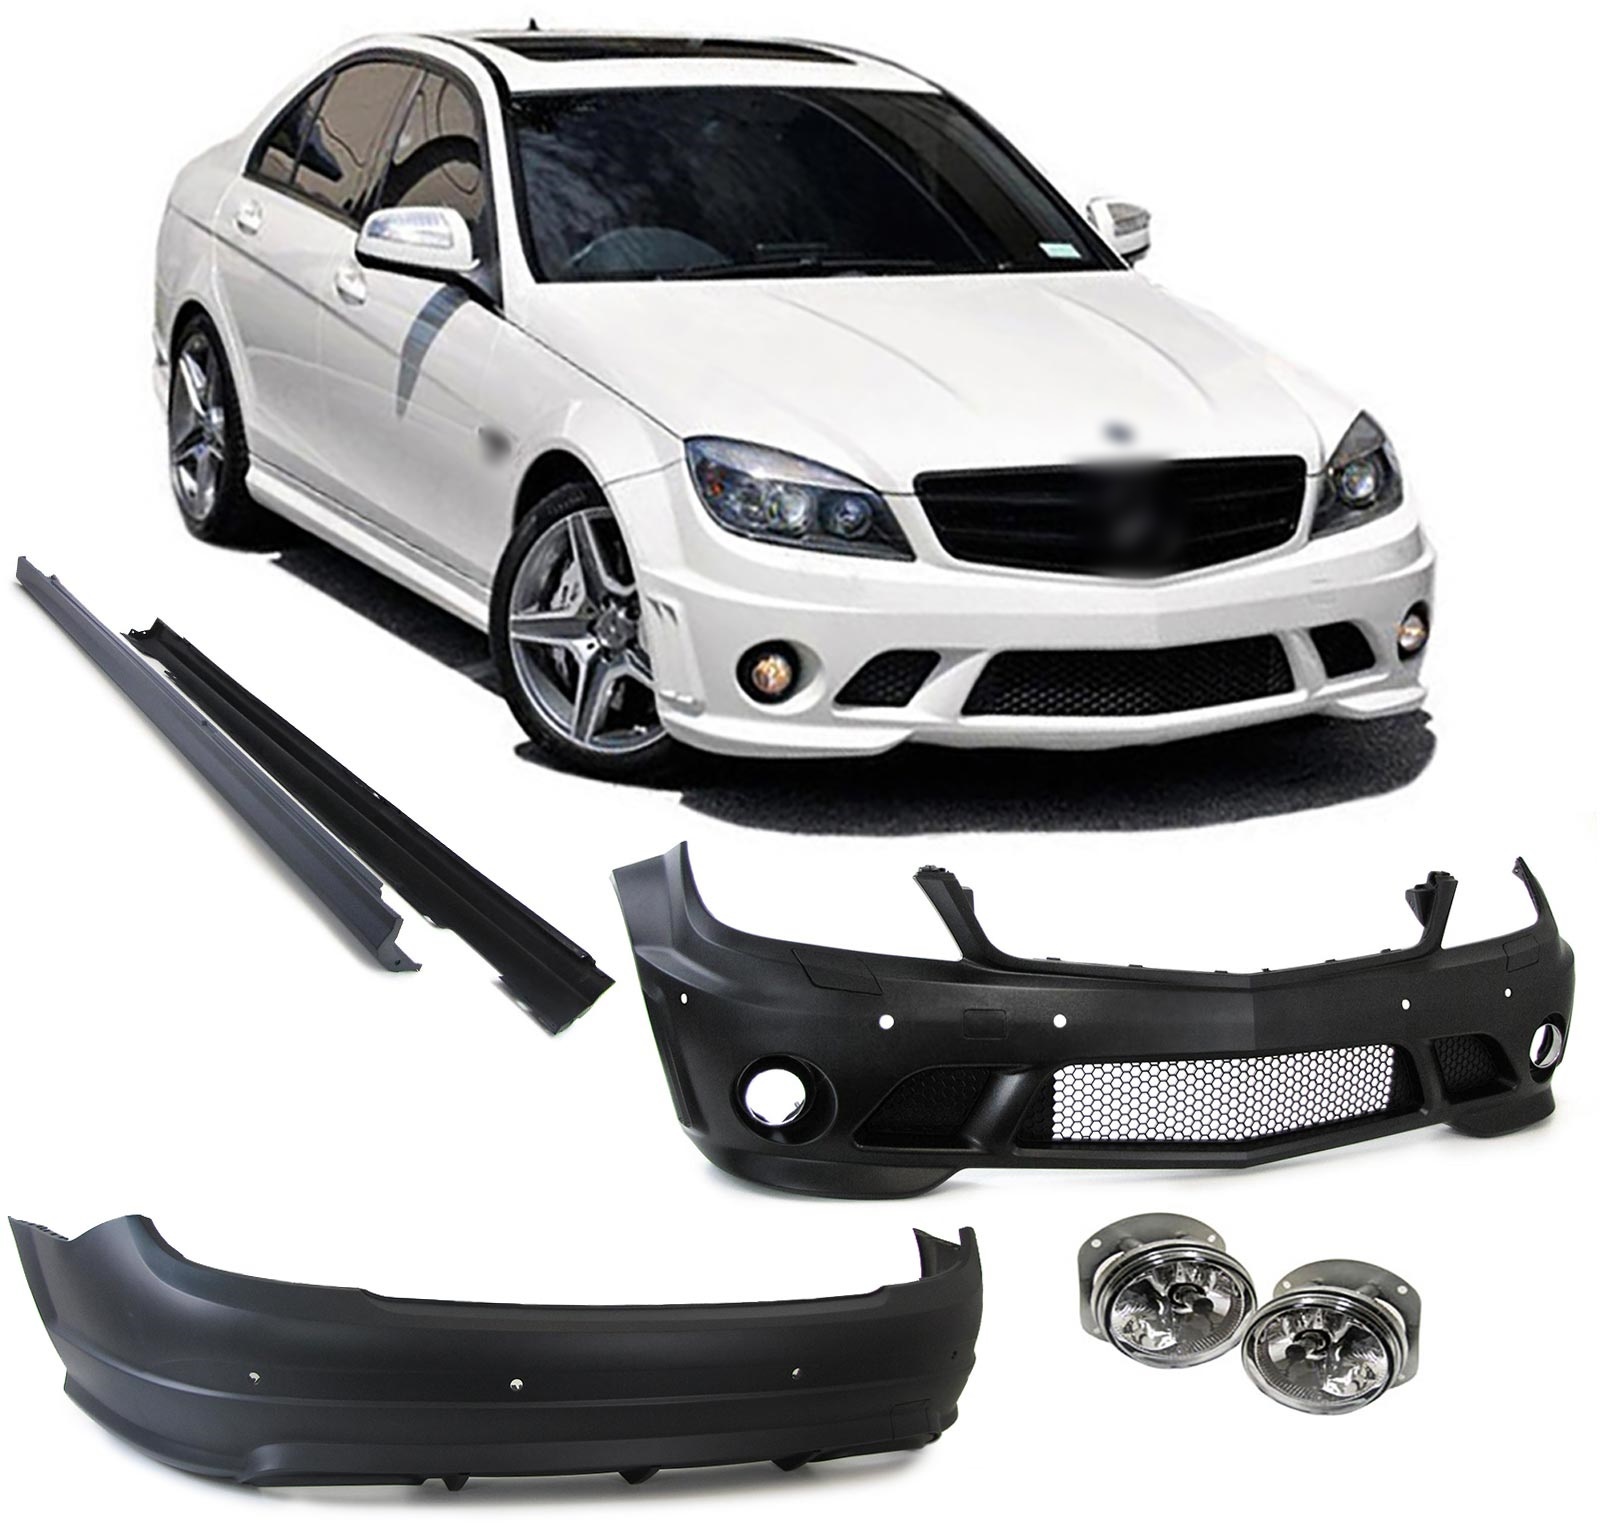 C63 AMG Look Body Kit for Mercedes Benz C-Class W204 